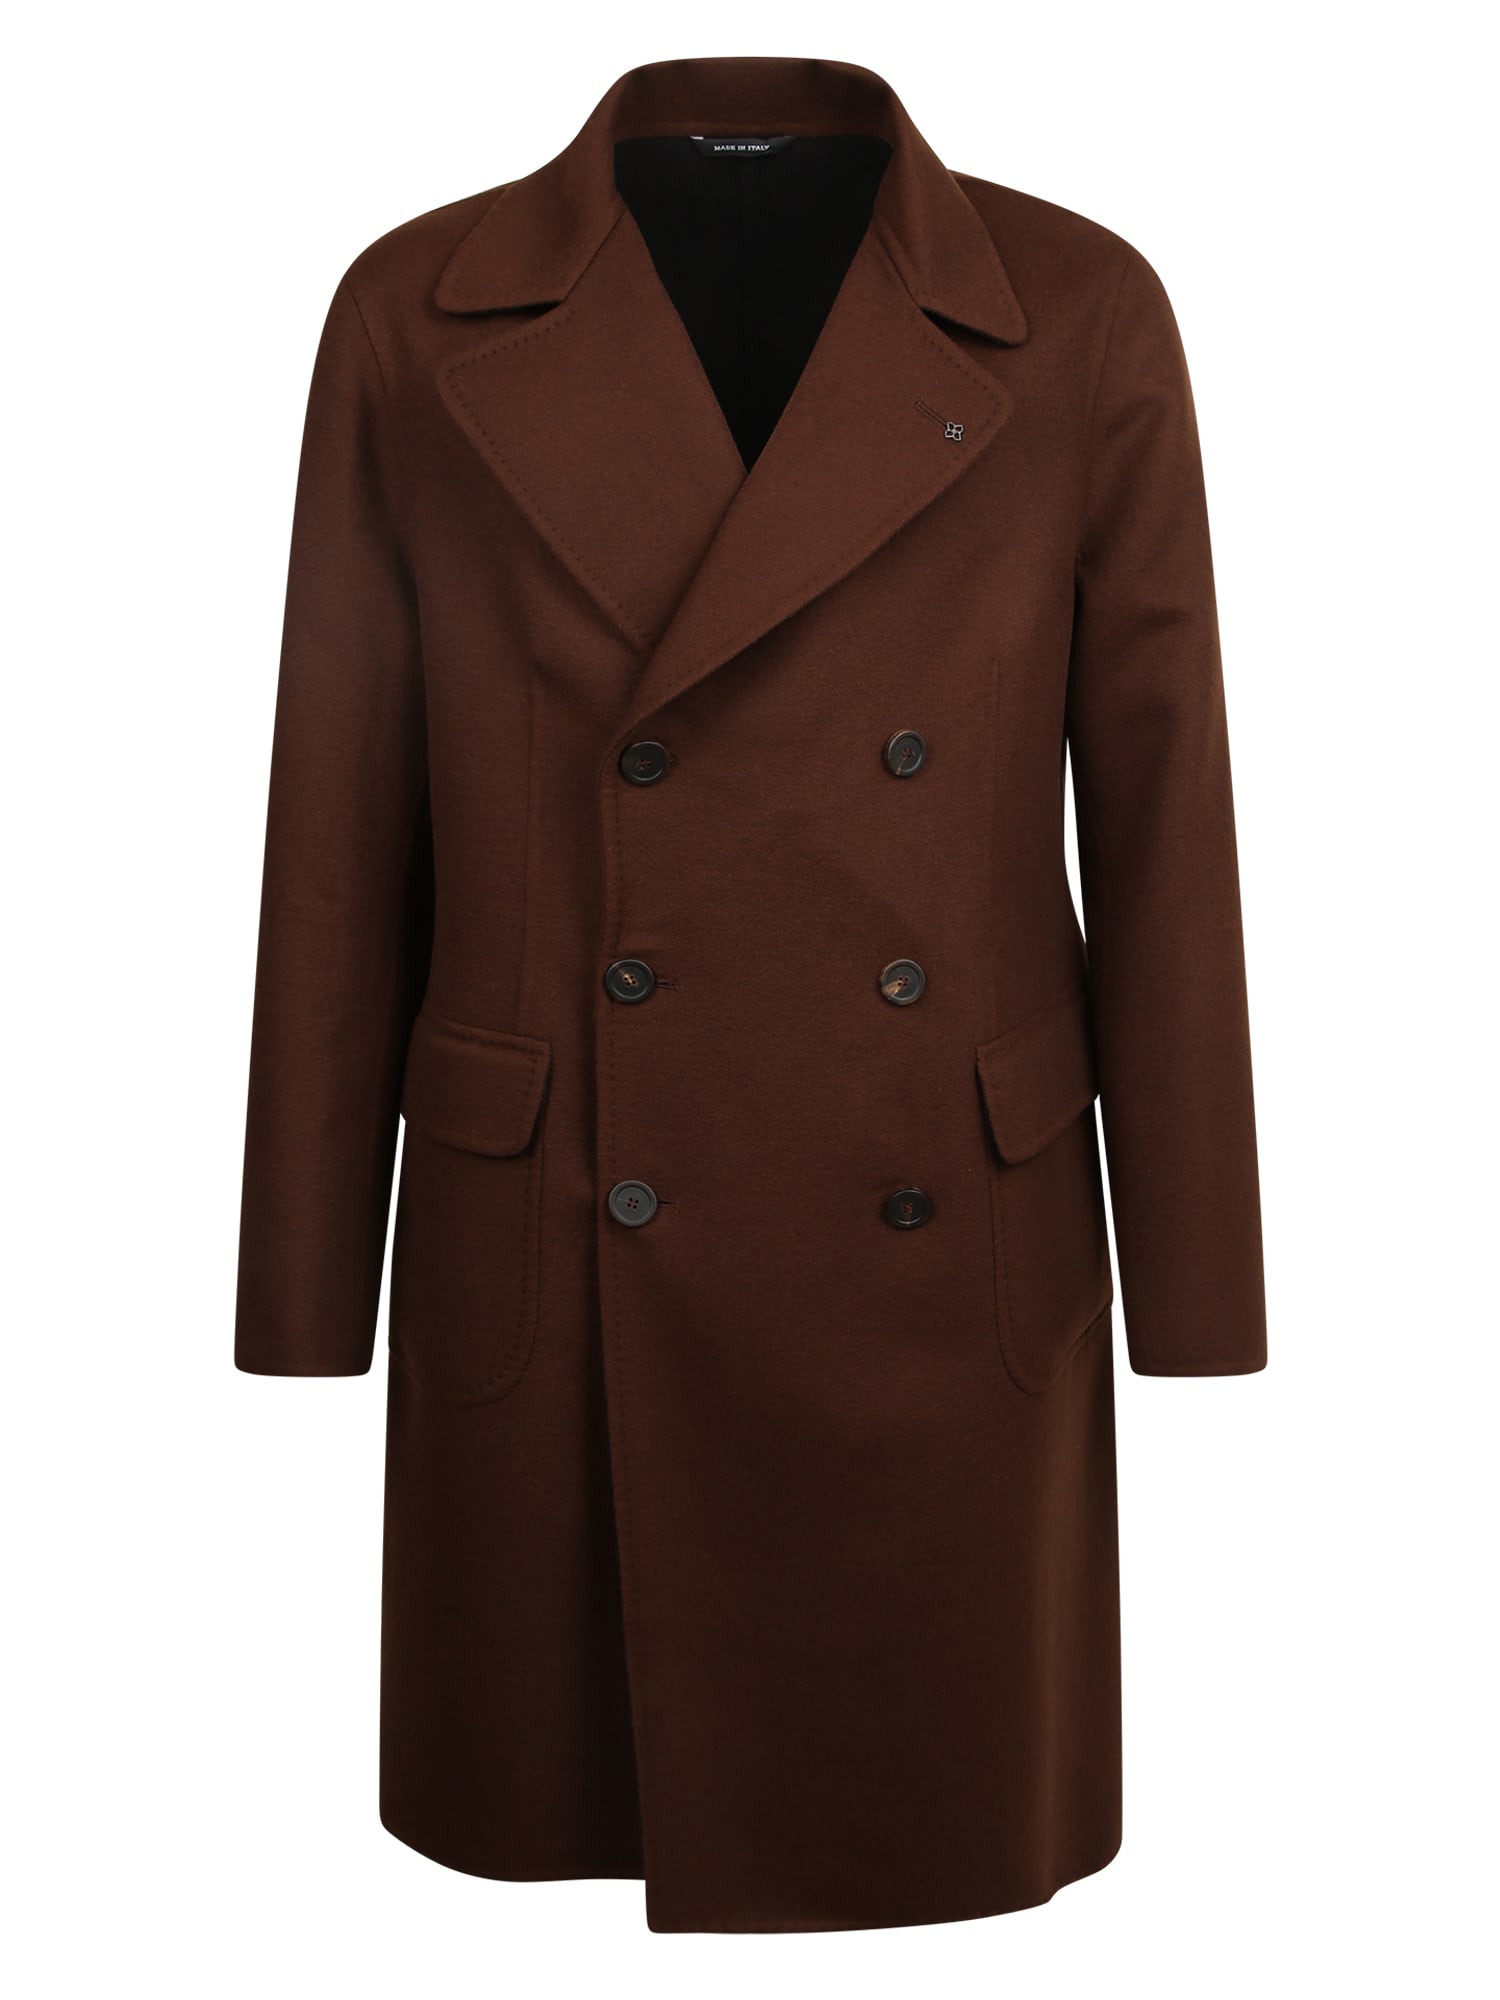 Tagliatore Double - Breasted Wool Coat